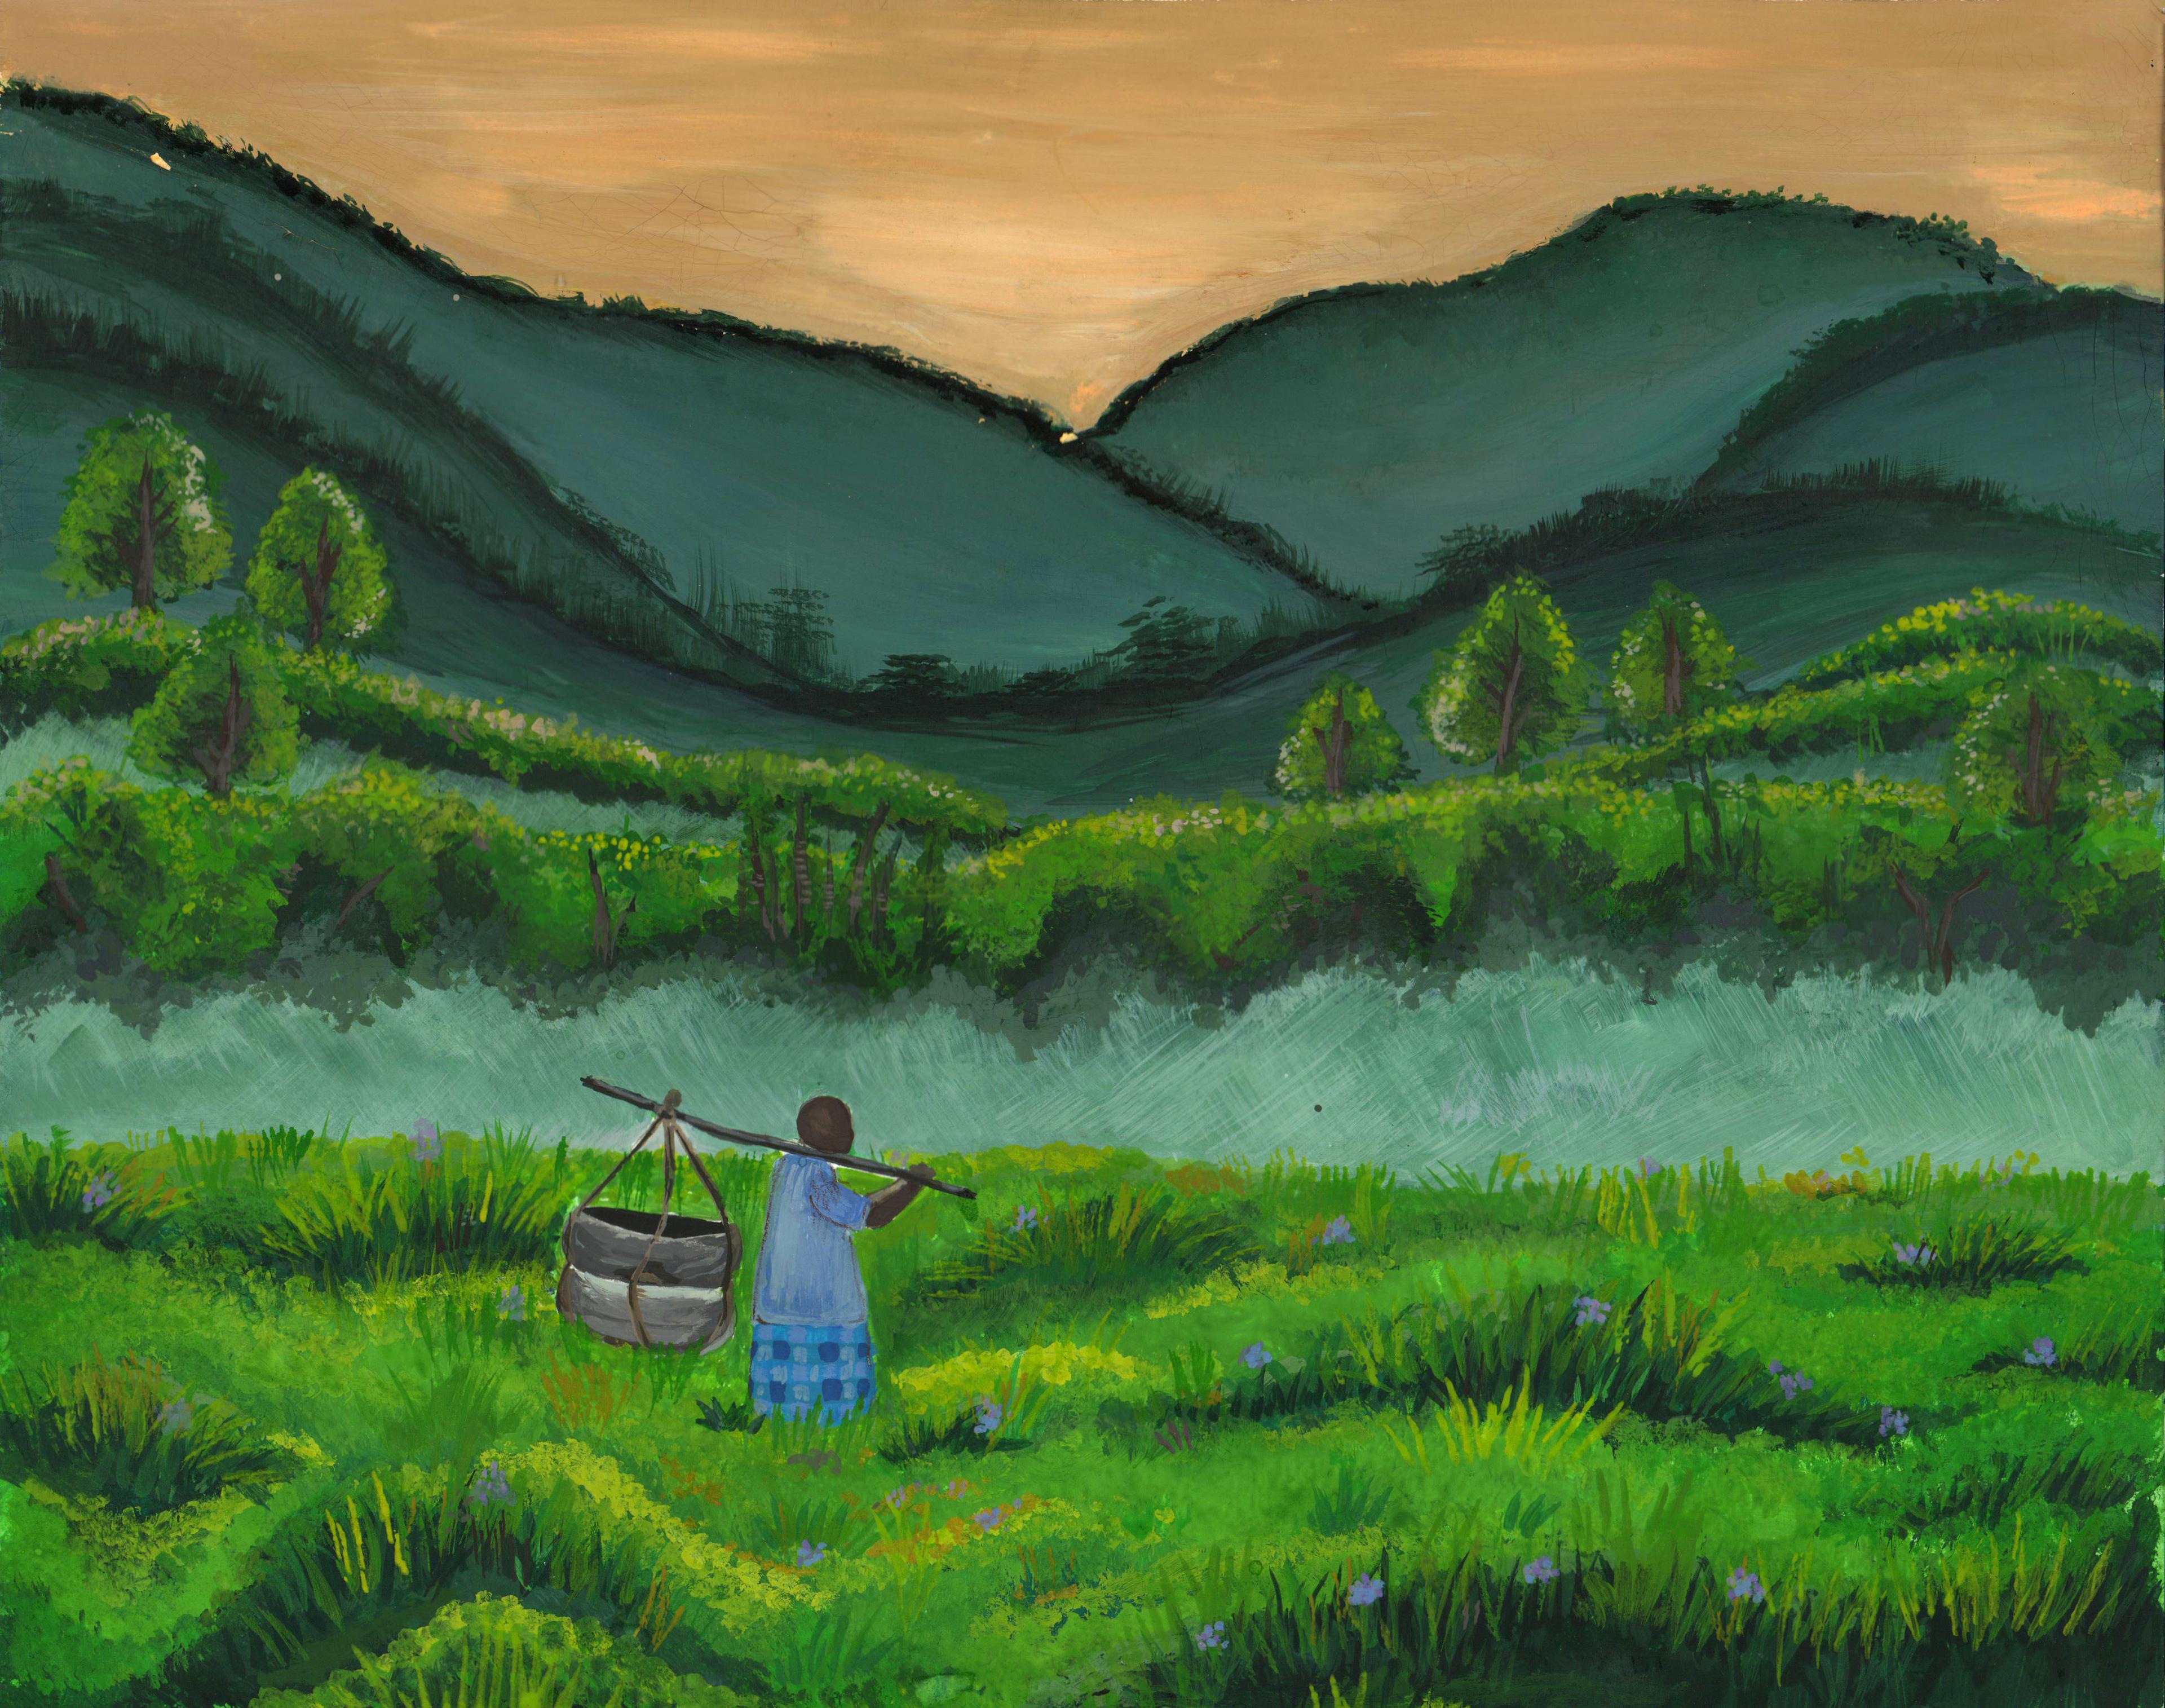 Gouache painting of a farmer walking through a large green field from left to right, carrying a large basket balancedon over one shoulder by a long stick held in the right hand. Behind the green field, a short and shallow elevated cliff leads to receding green pastures and dark green mountains in the distance. The sky above the mountains is a warm orange.